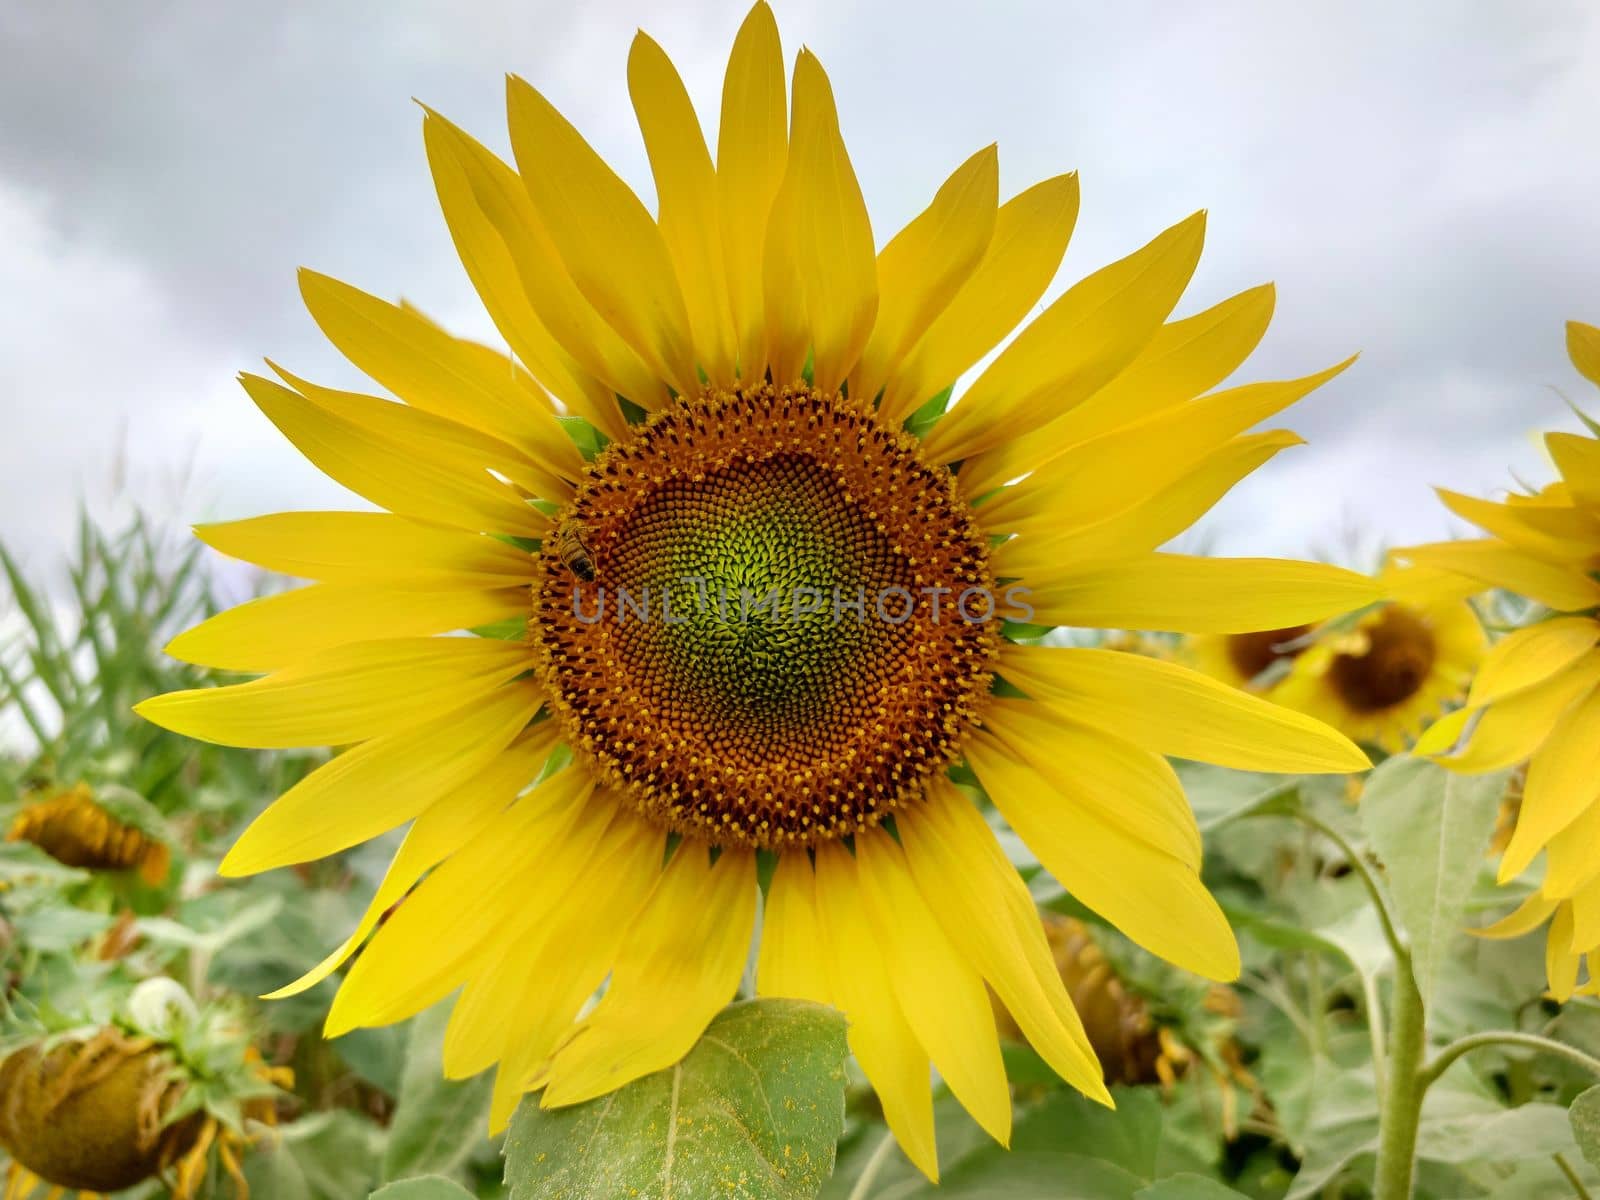 Close-up of a yellow sunflower in full bloom on a cloudy day by Mastak80